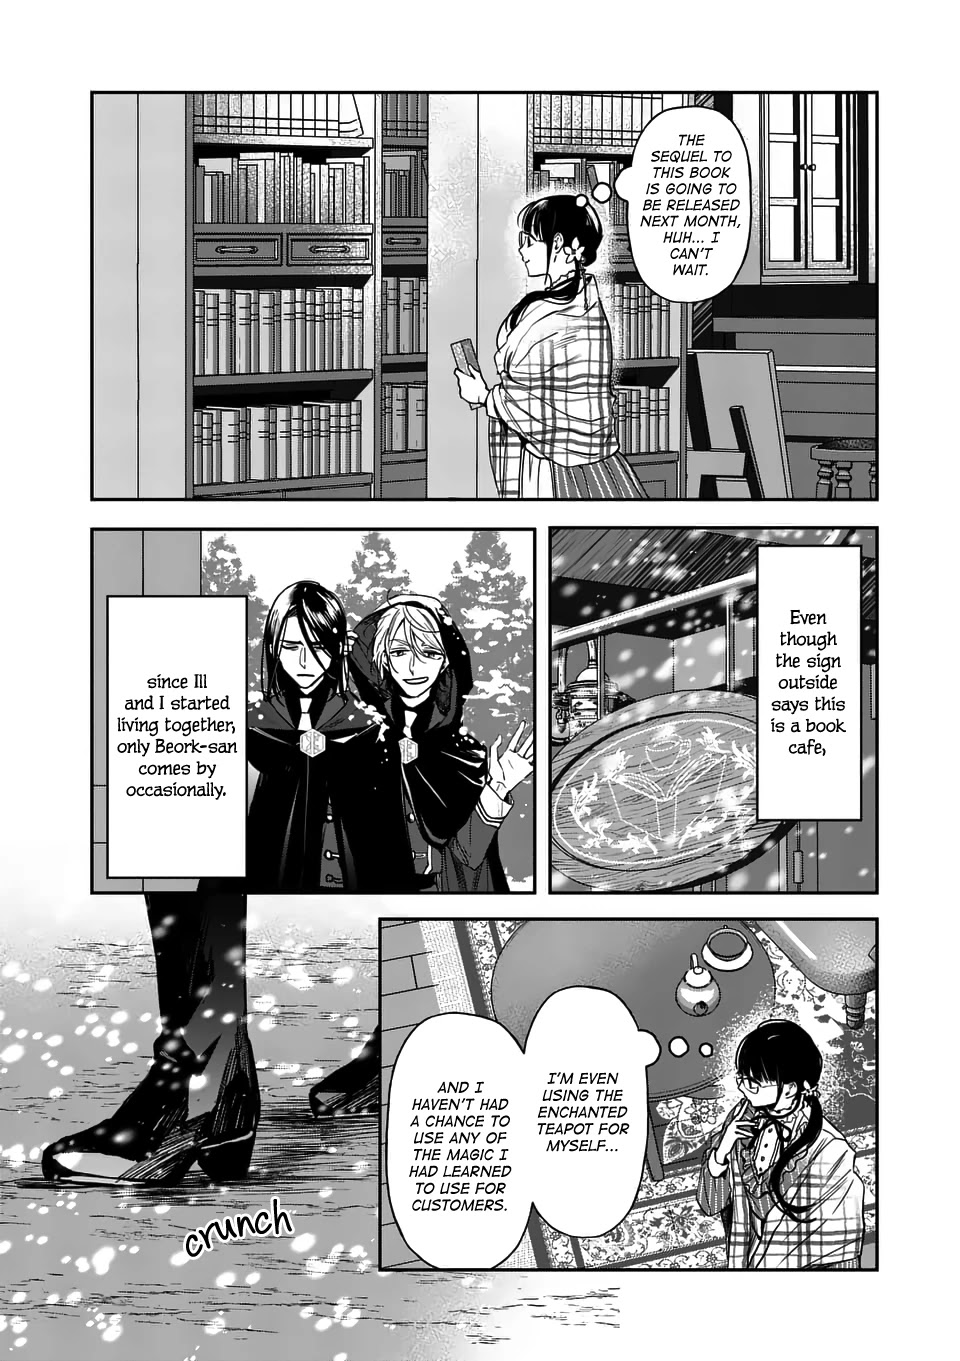 The Savior's Book Café In Another World - Page 2